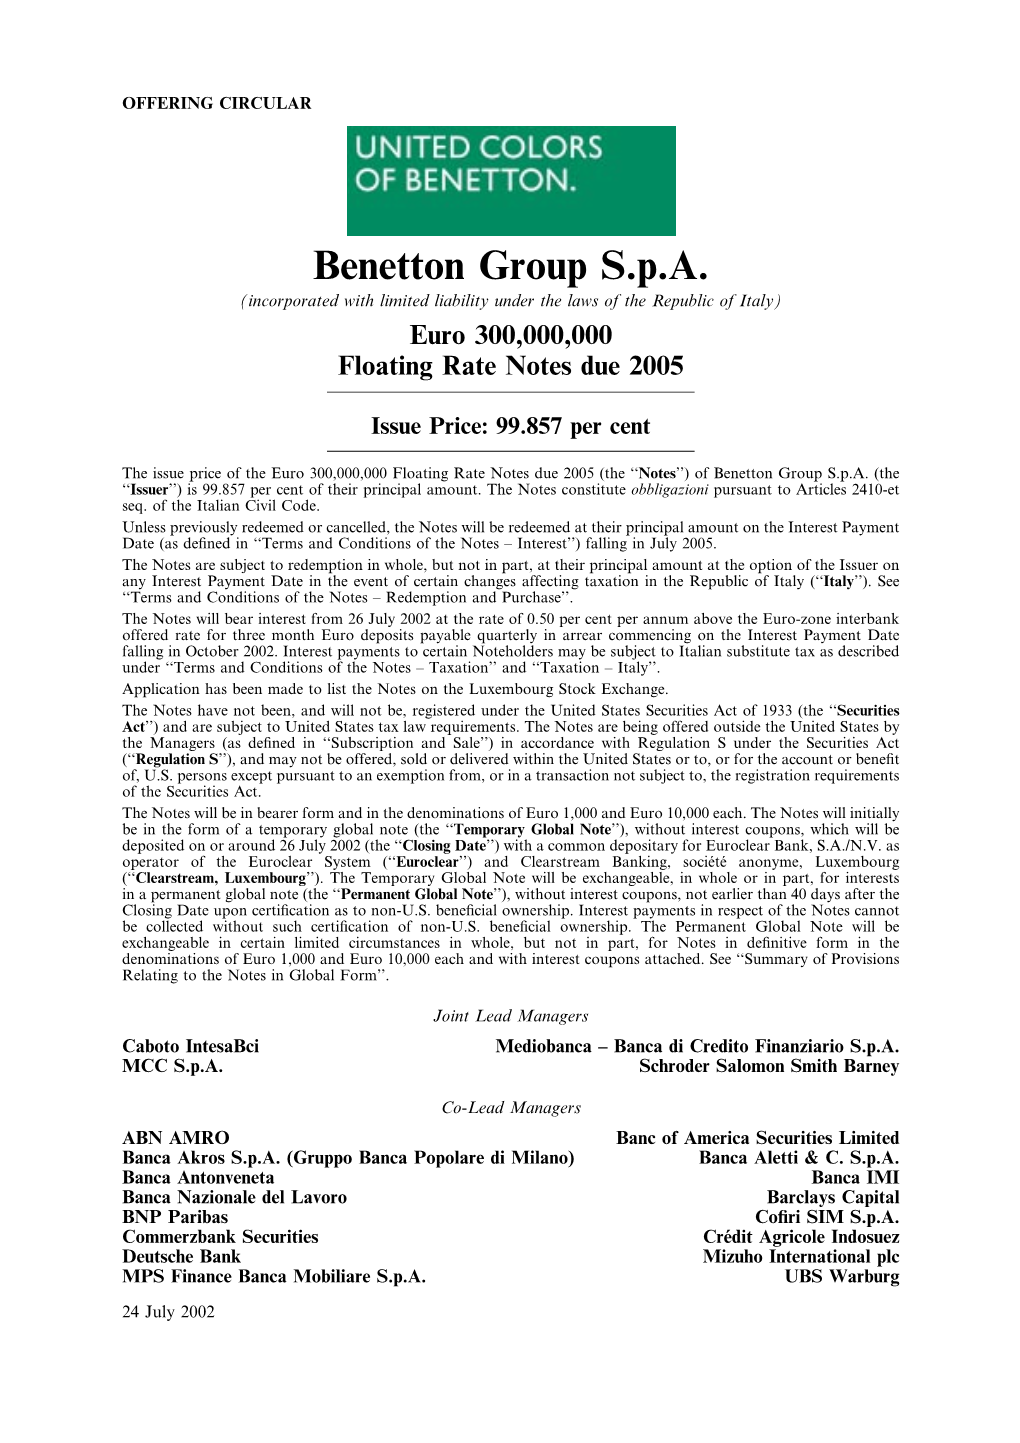 Benetton Group S.P.A. (Incorporated with Limited Liability Under the Laws of the Republic of Italy) Euro 300,000,000 Floating Rate Notes Due 2005